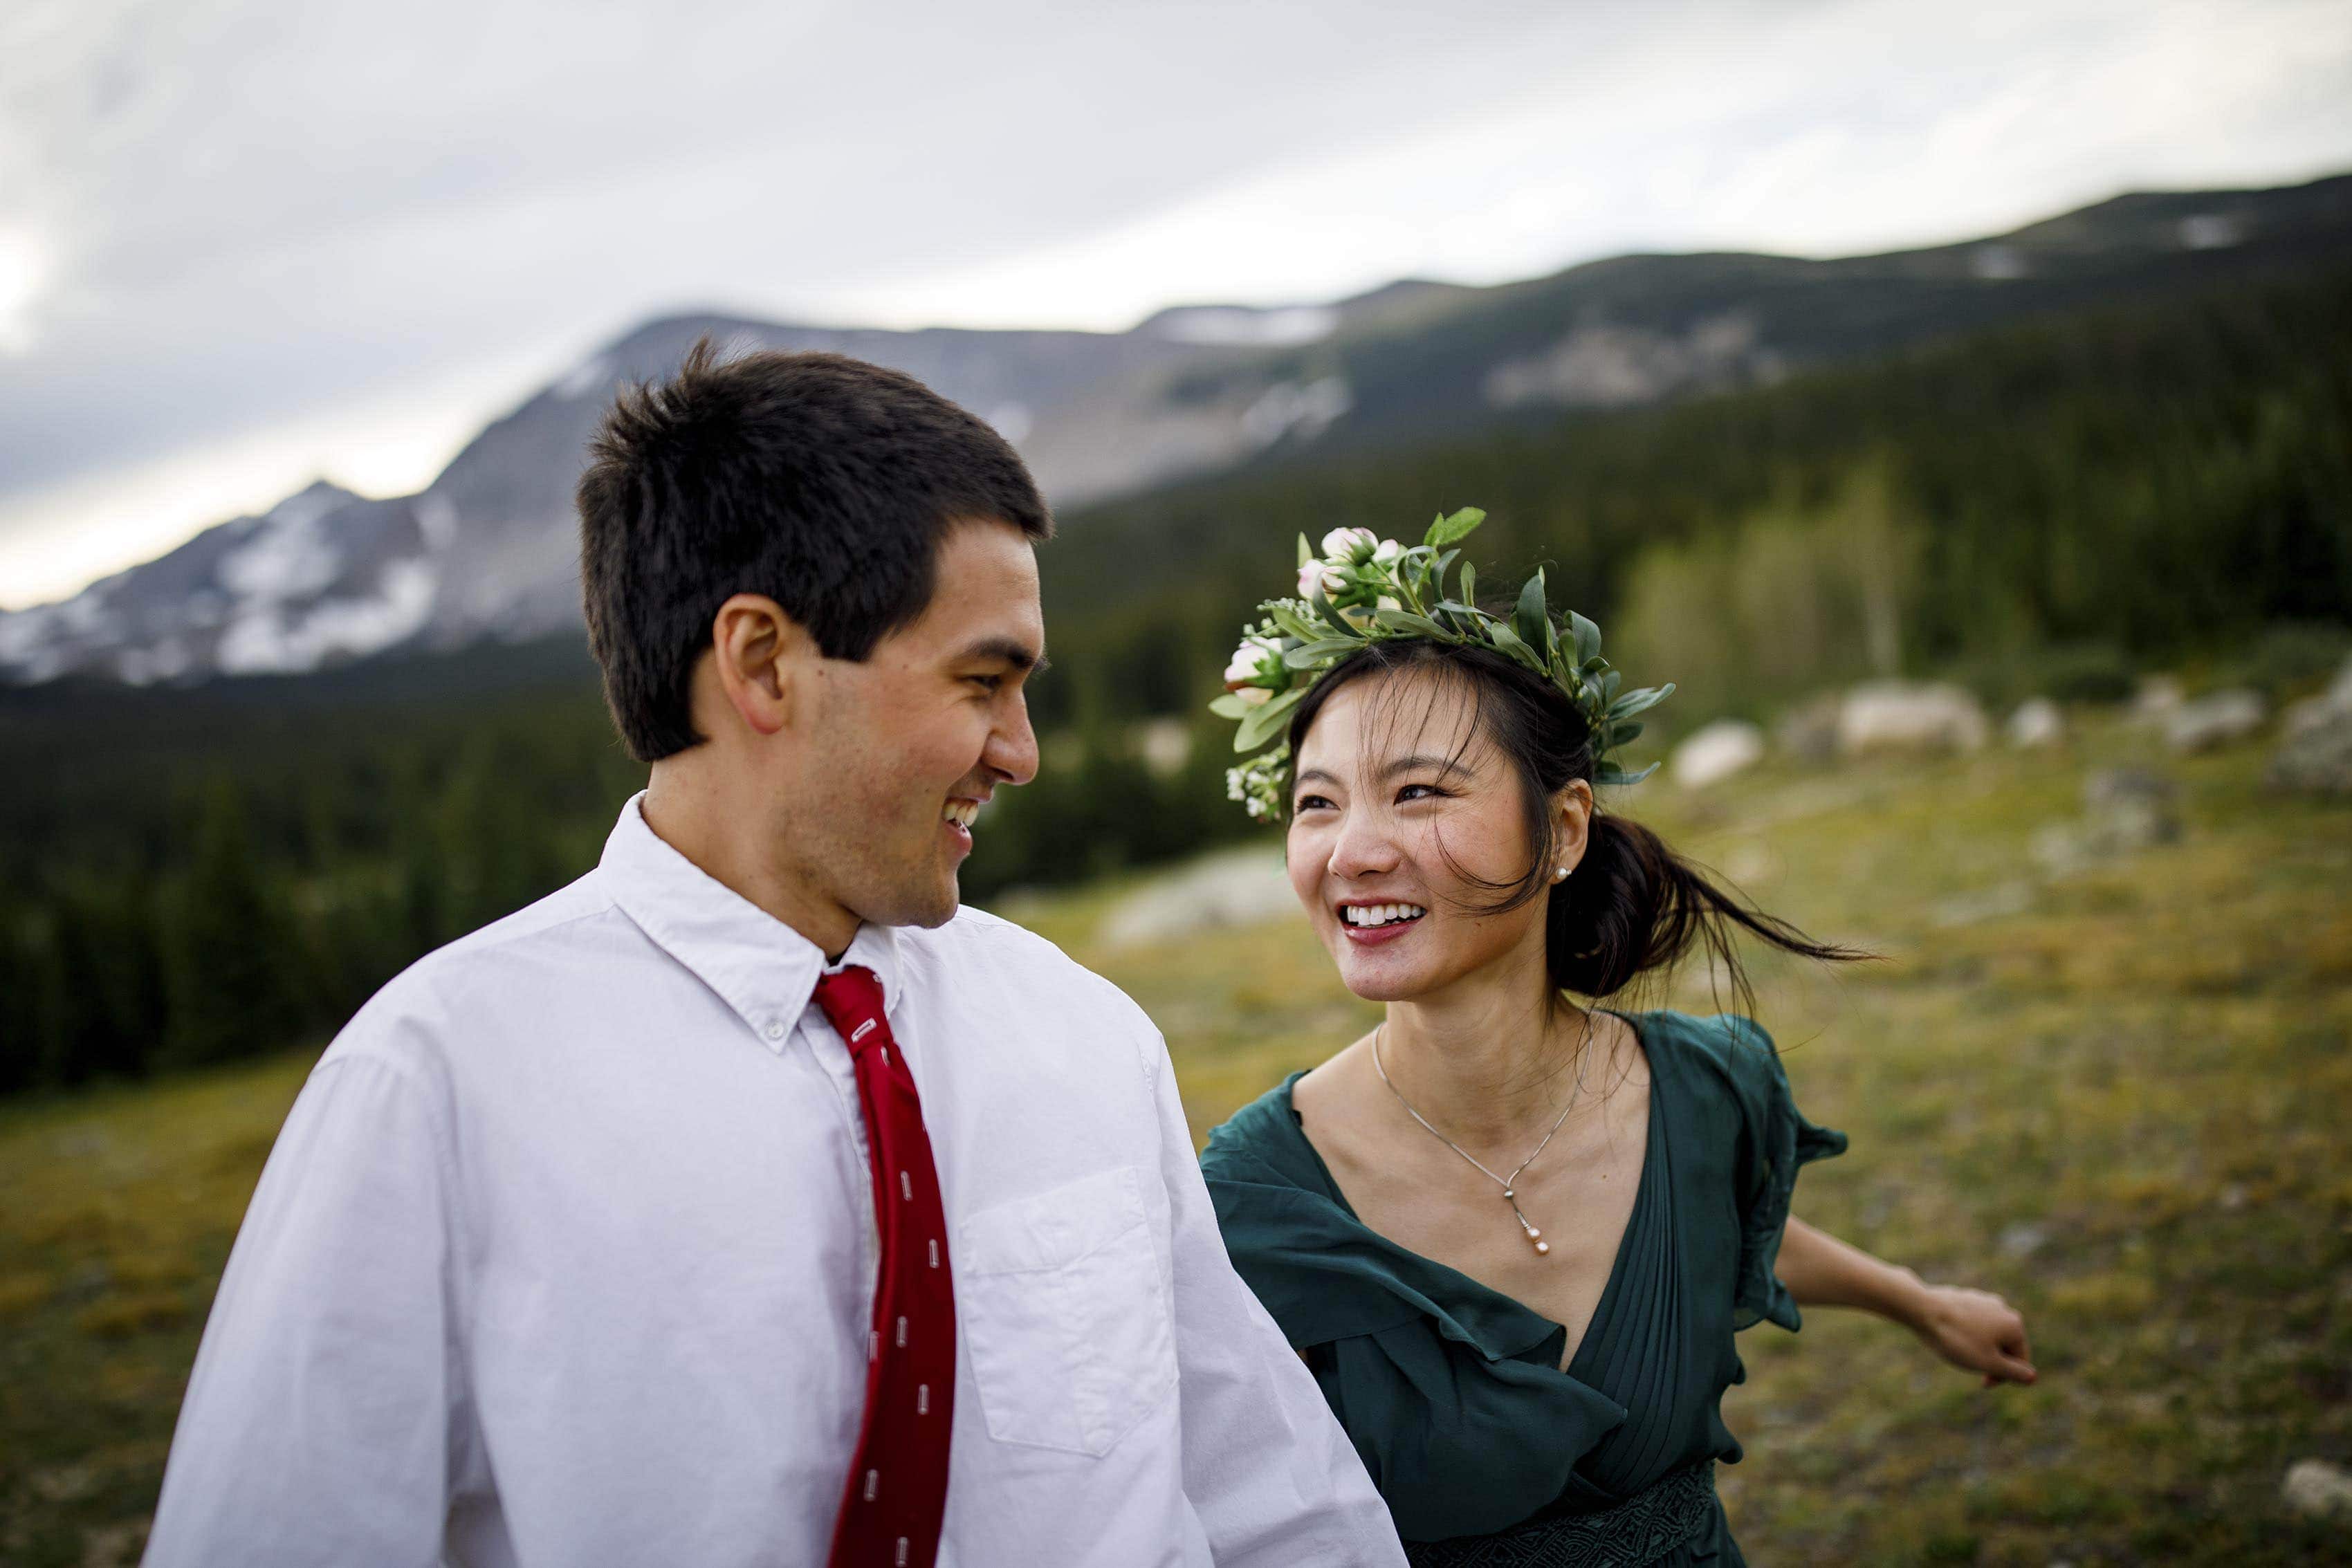 Cecelia and Jamie laugh together at Brainard Lake during their elopement